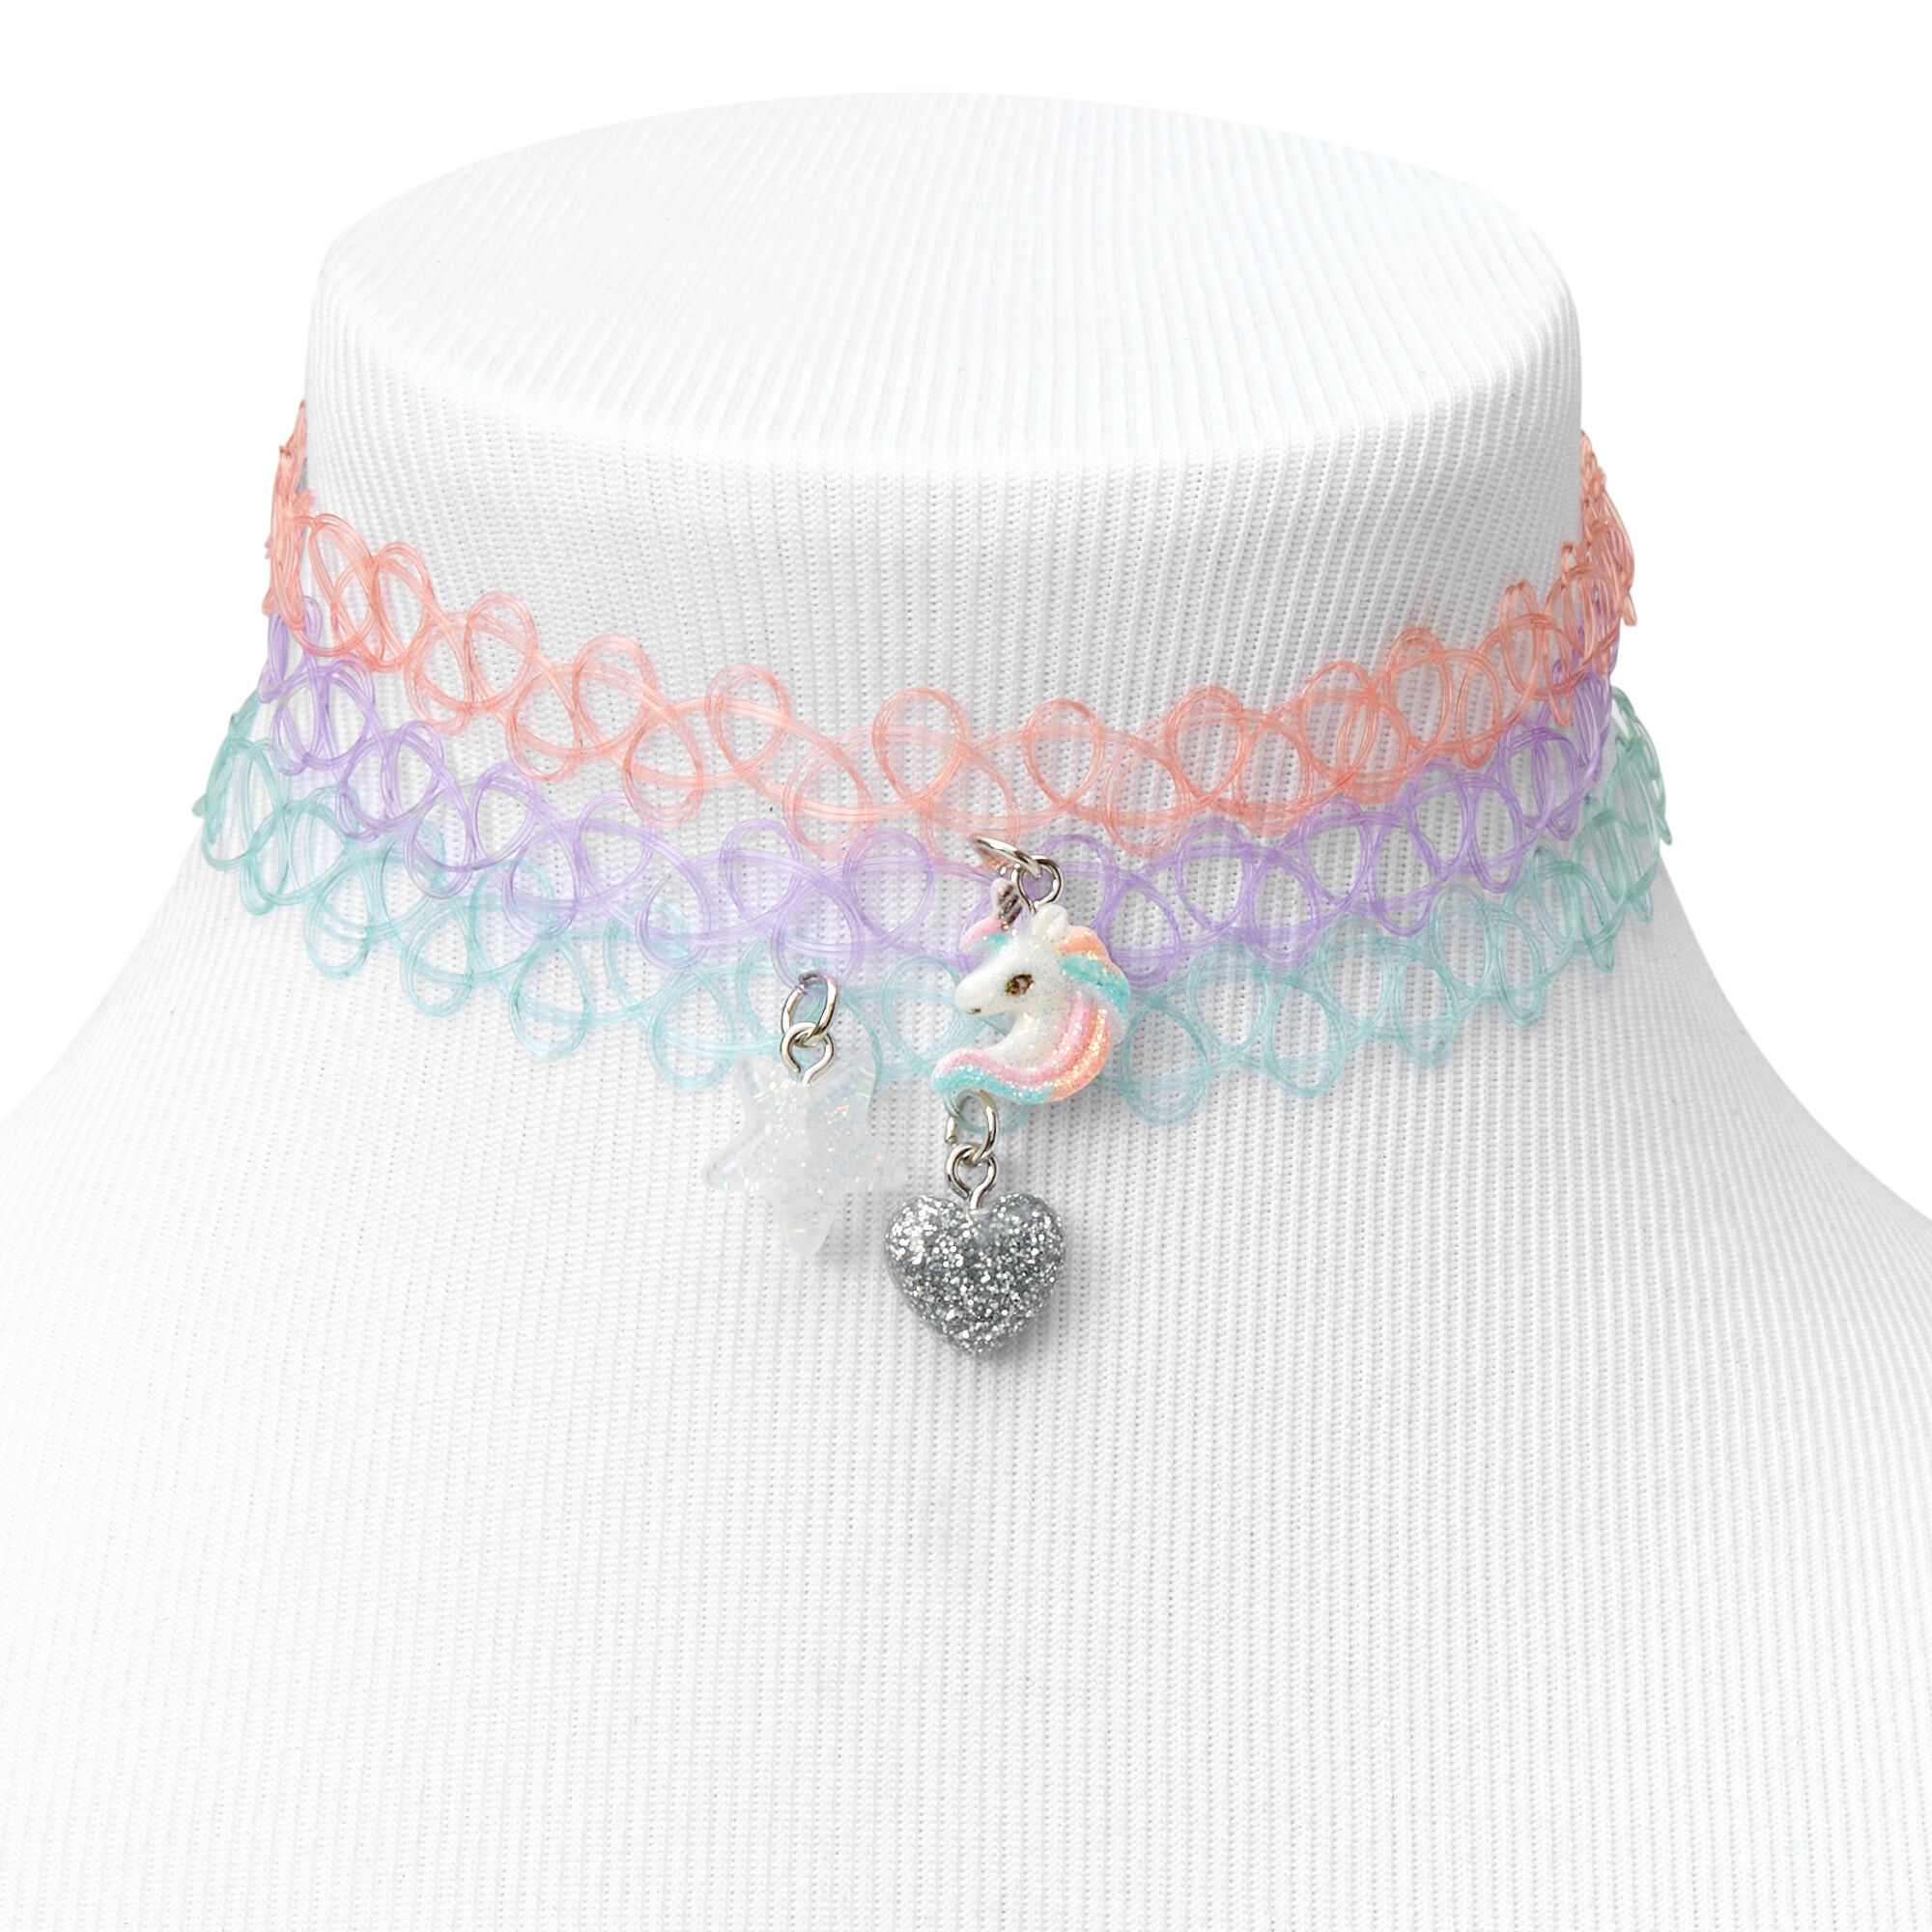 View Claires Club Glitter Charm Tattoo Choker Necklaces 3 Pack information